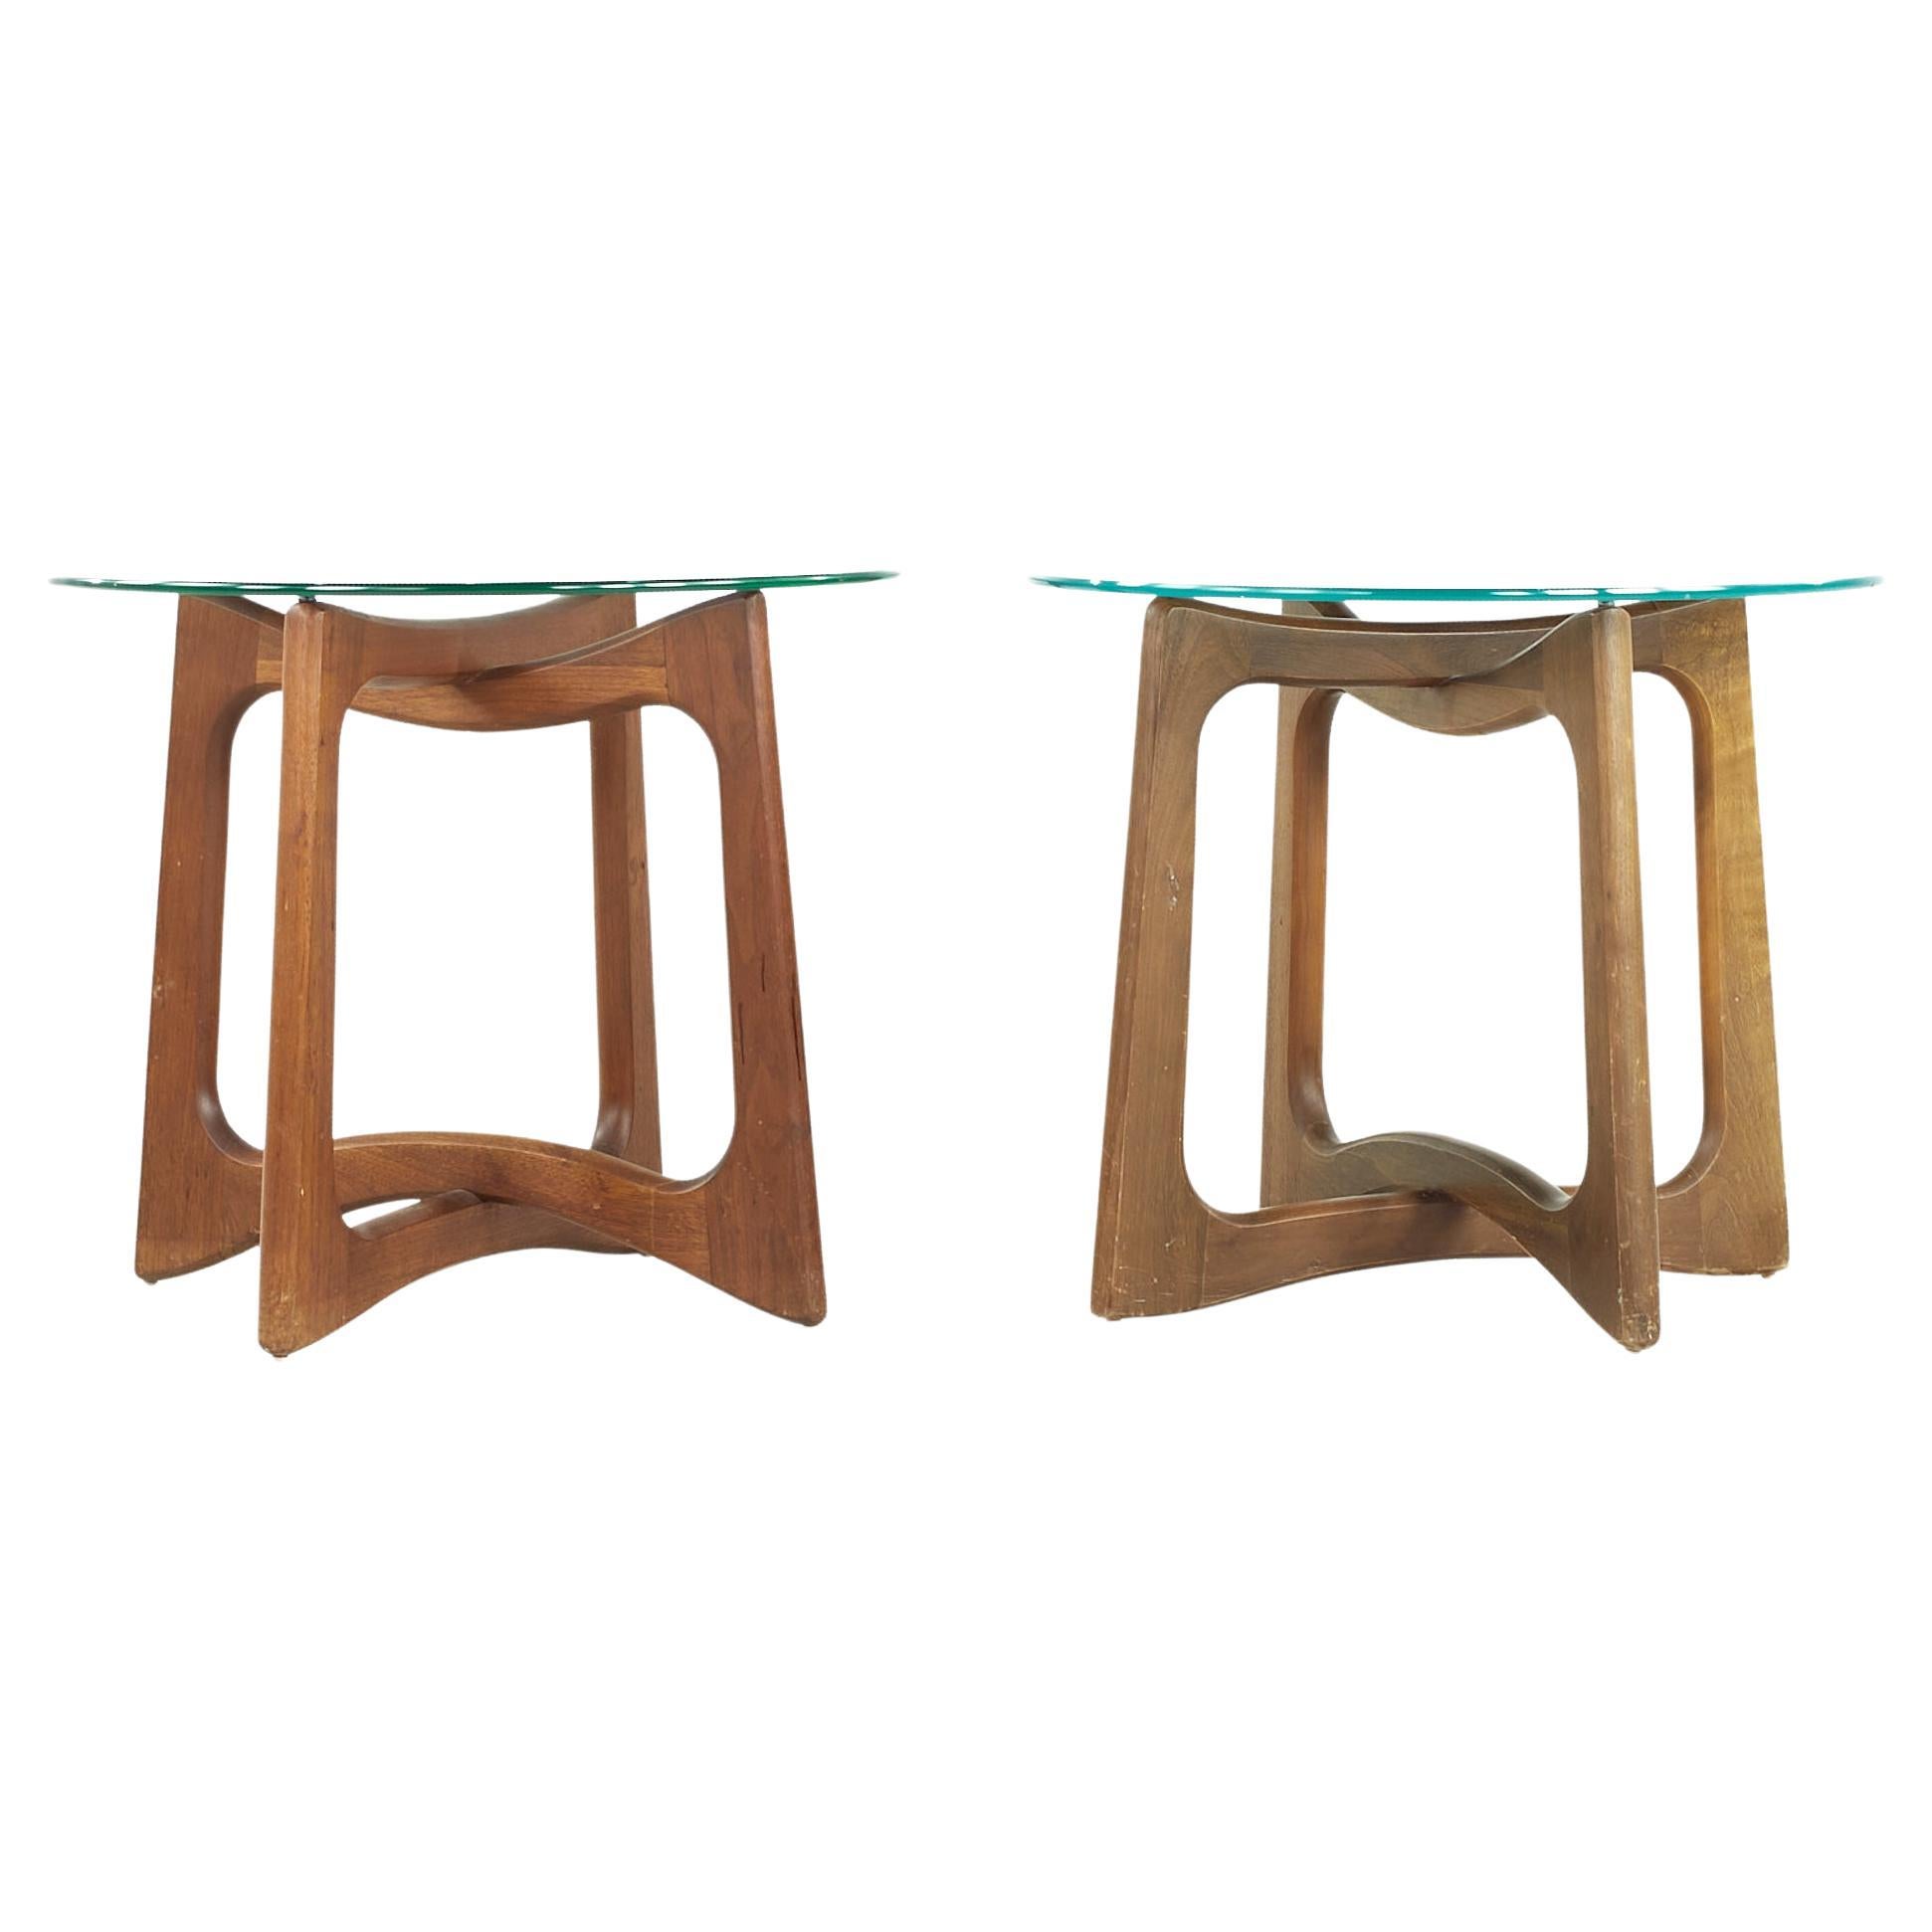 Adrian Pearsall Midcentury Walnut and Glass Side Tables, Pair For Sale